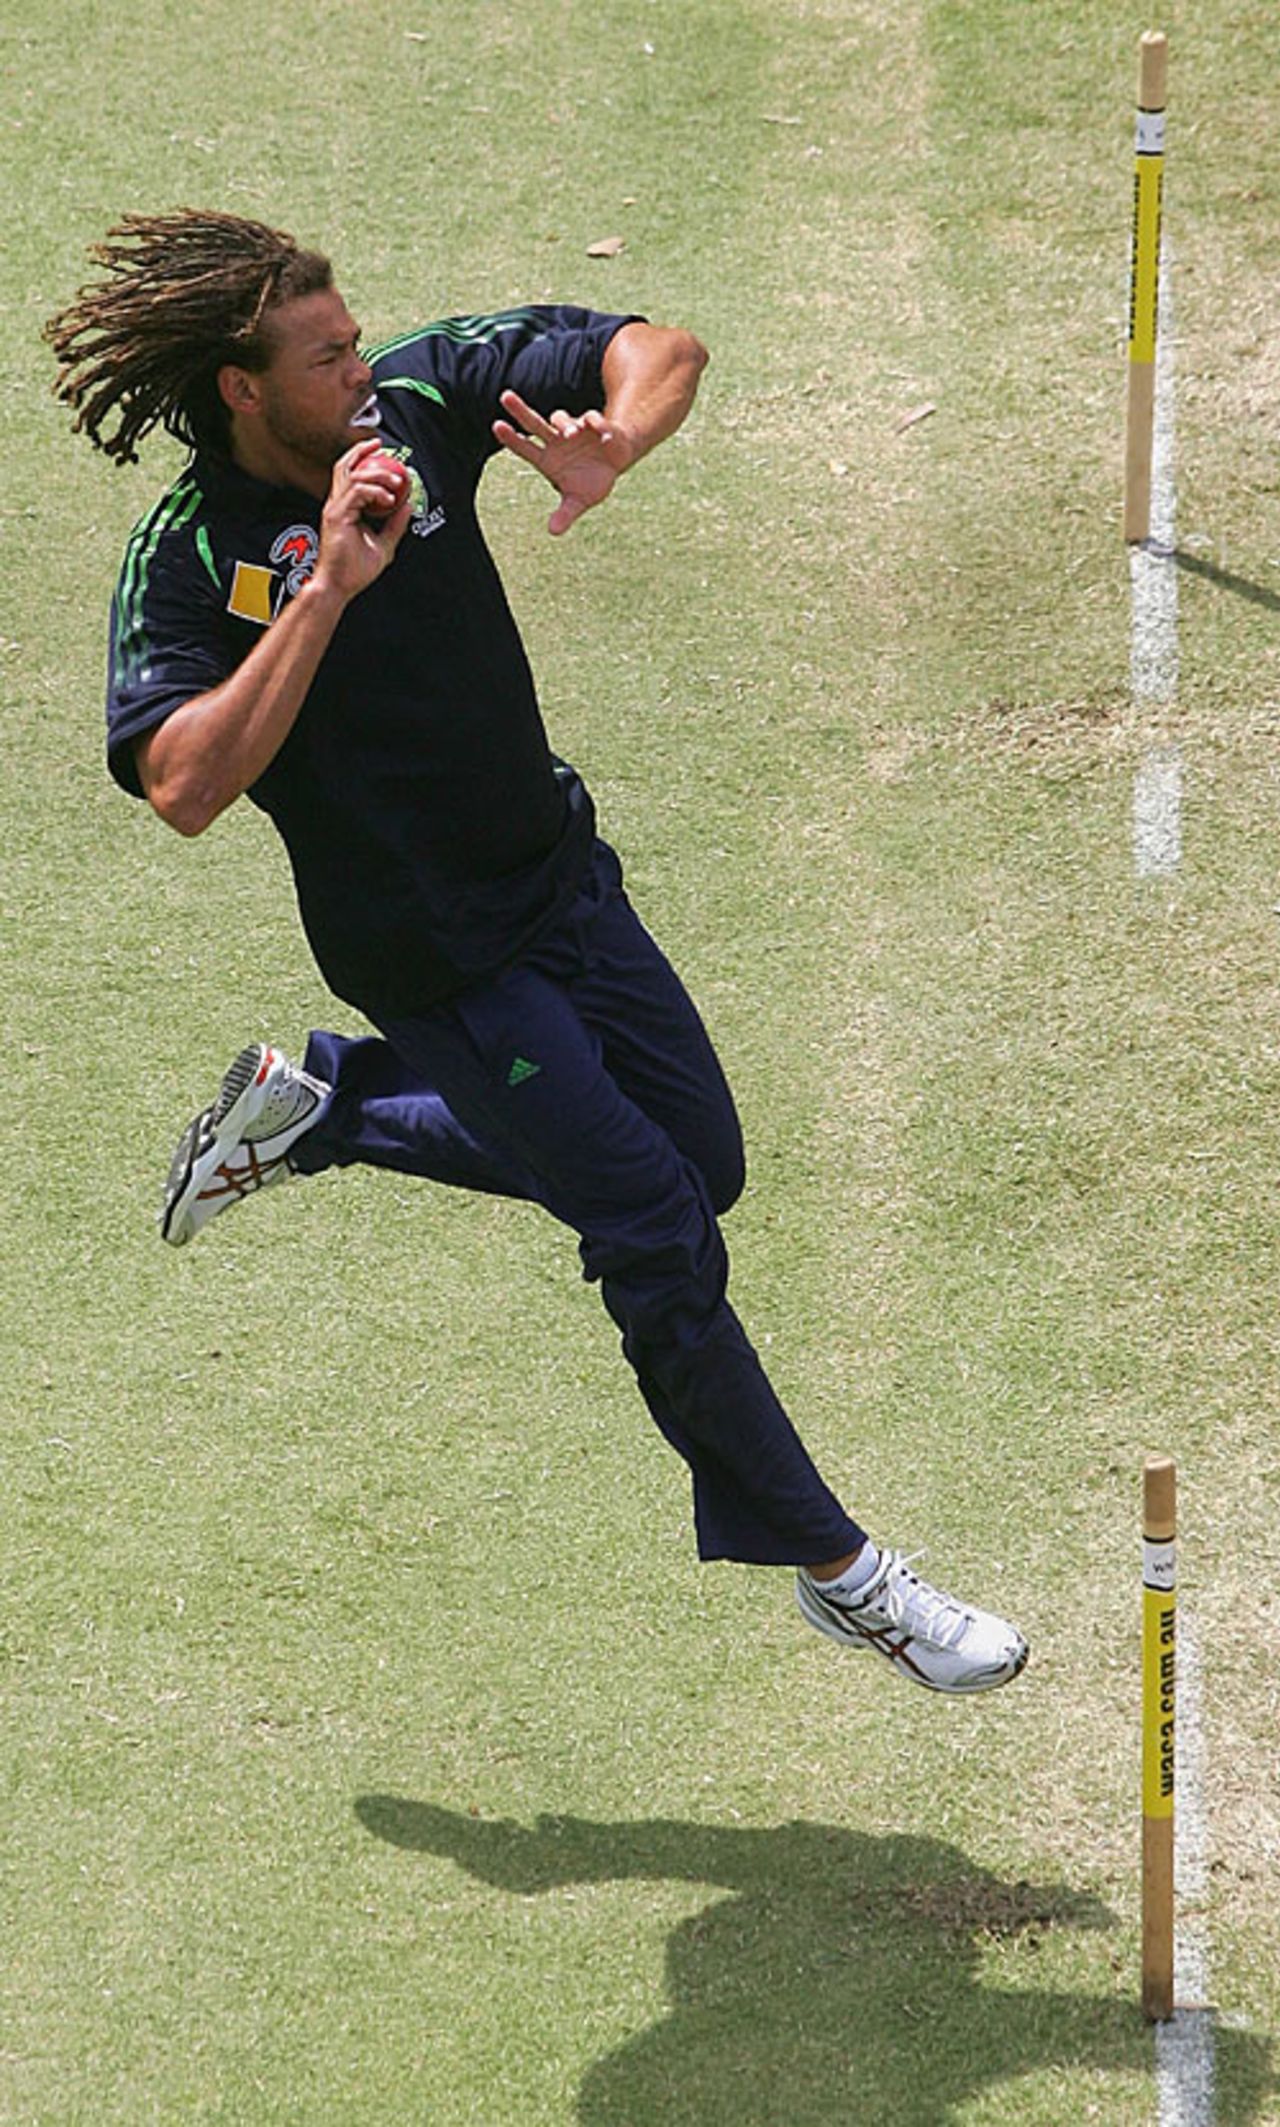 Andrew Symonds approaches his delivery stride in the nets ahead of the third Test, Perth, December 11, 2006